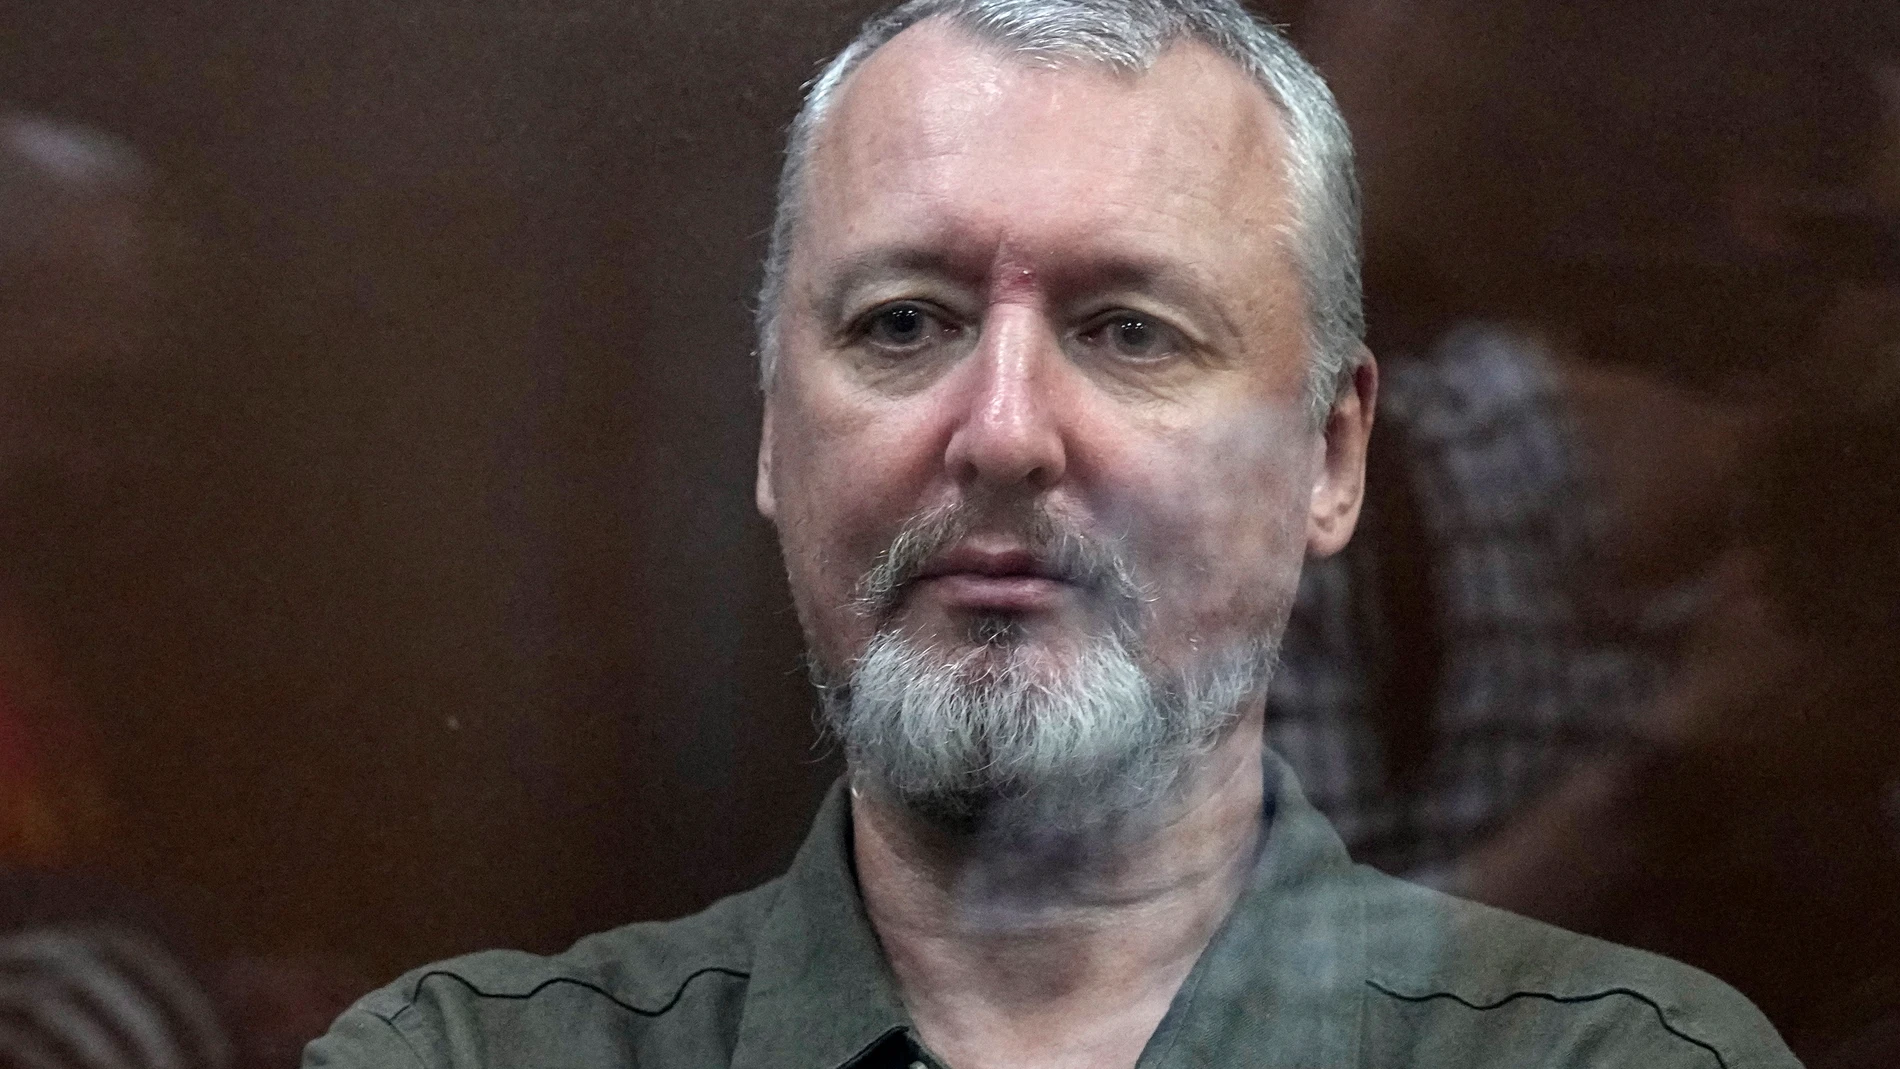 Moscow (Russian Federation), 21/07/2023.- Former military commander of the self-proclaimed Donetsk People's Republic (DPR) Igor Strelkov (Girkin) attends a court hearing at the Meshchansky District Court in Moscow, Russia, 21 July 2023. Strelkov is charged with Public calls for extremist activities using the media or the Internet. (Rusia, Moscú) EFE/EPA/ALEXANDER ZEMLIANICHENKO / POOL POOL PHOTO 